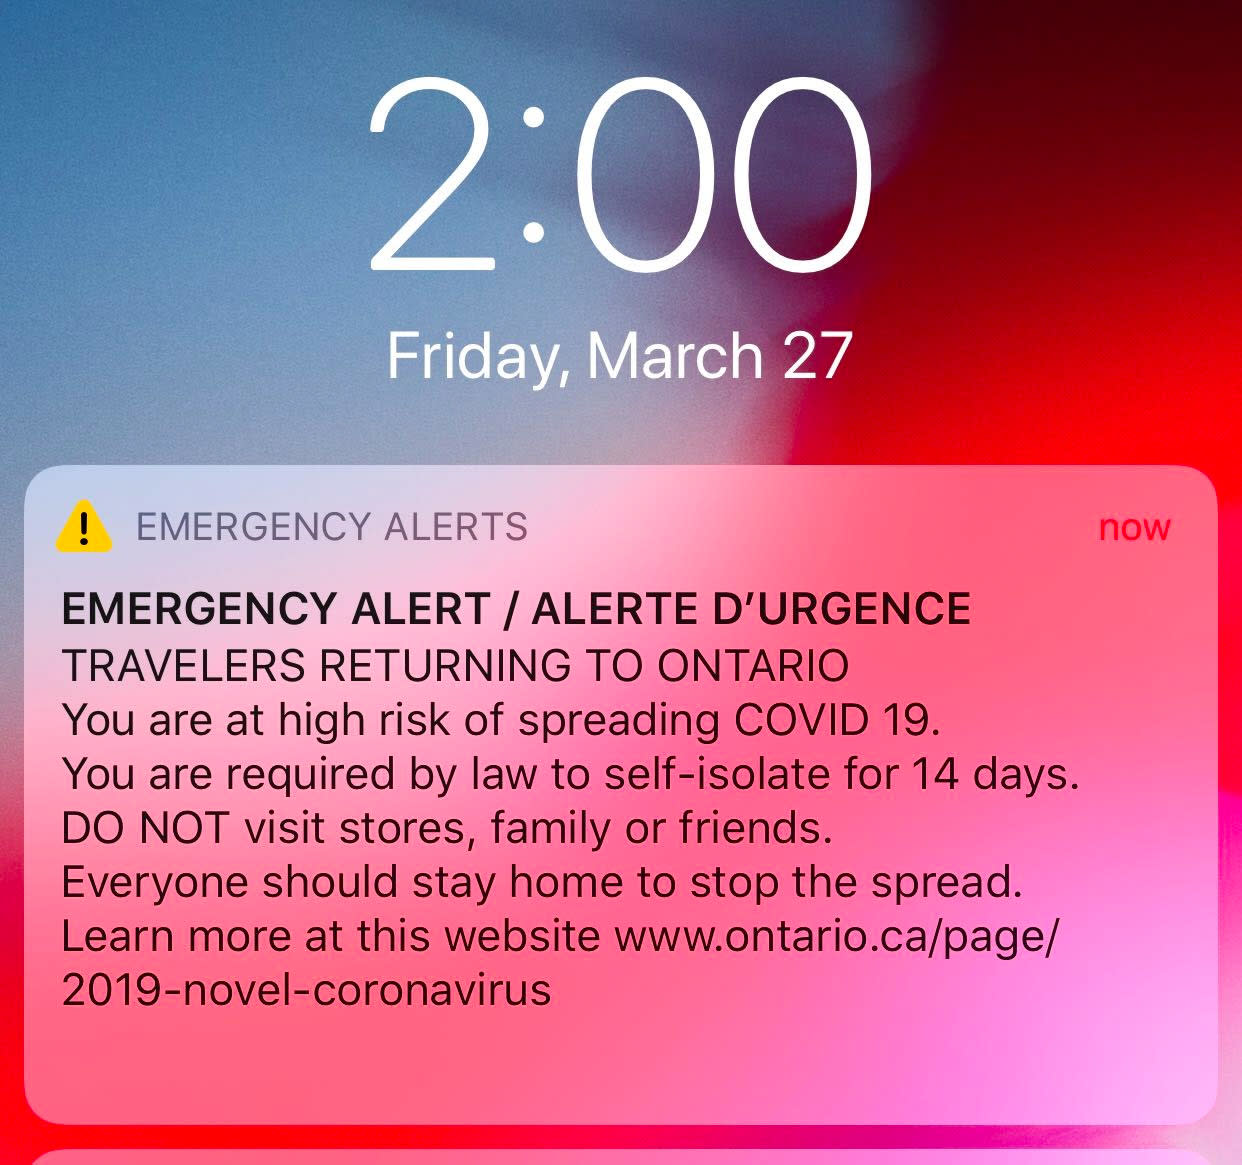 COVID19 Emergency Alert Ontario residents reacts with confusion